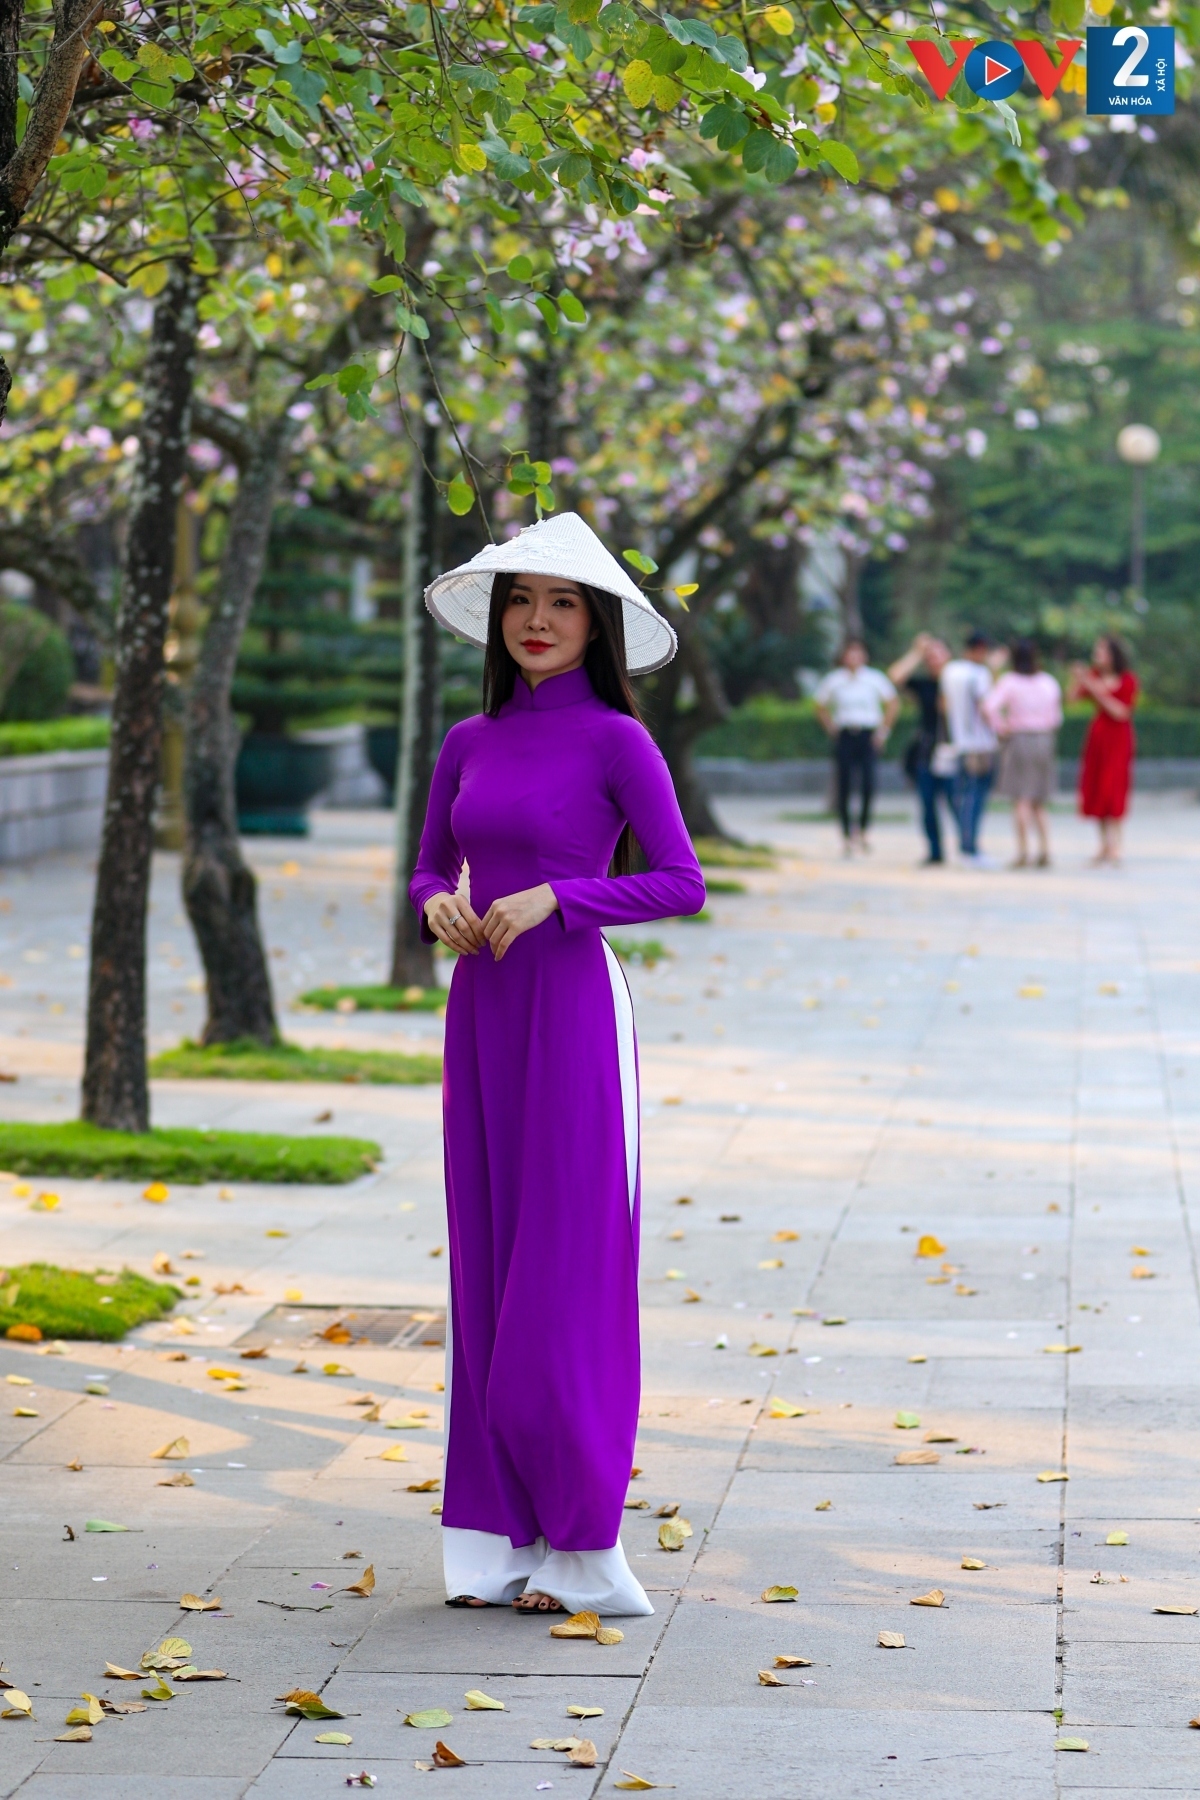 streets of hanoi adorned with ban flowers in full bloom picture 9